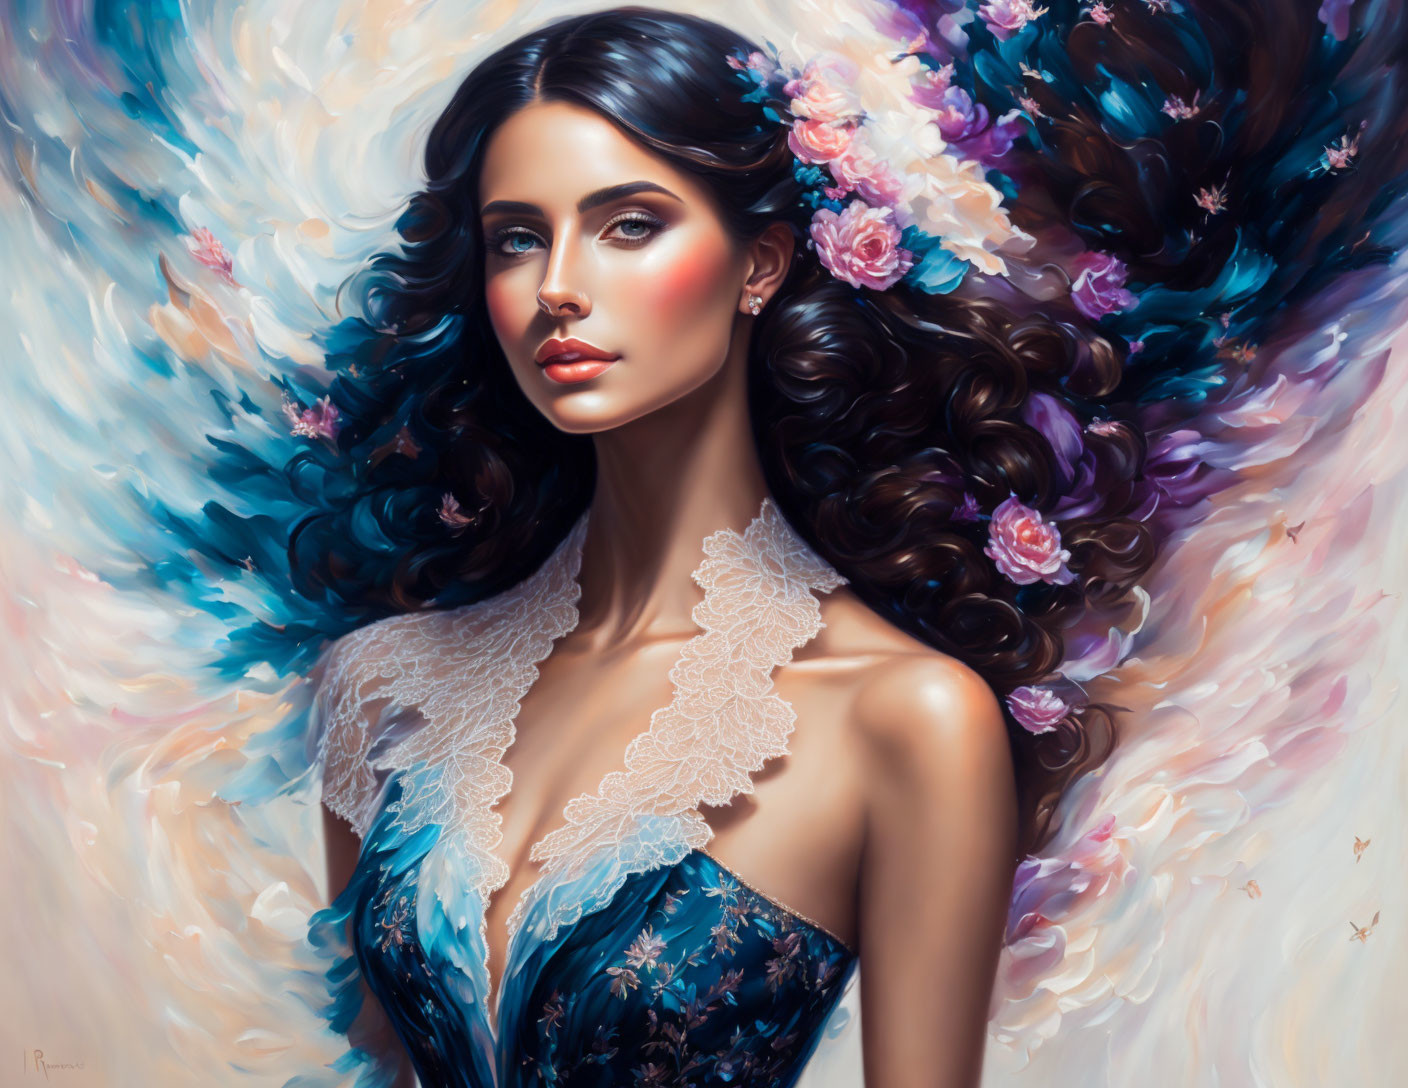 Digital painting of woman with flowing hair and roses, lace collar dress, dreamy background